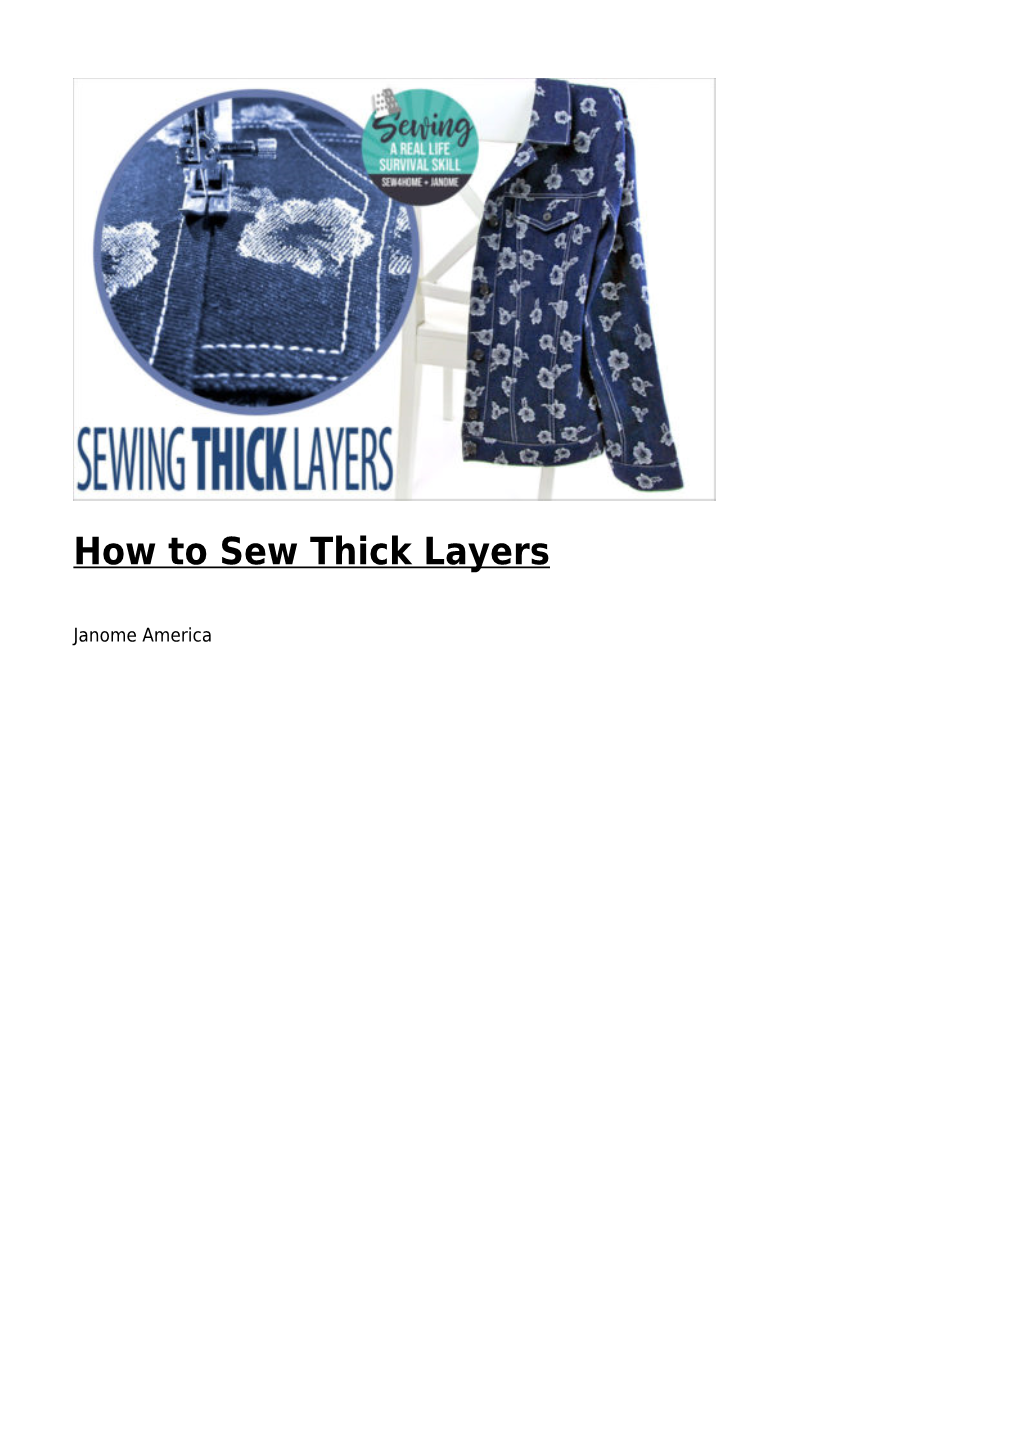 How to Sew Thick Layers